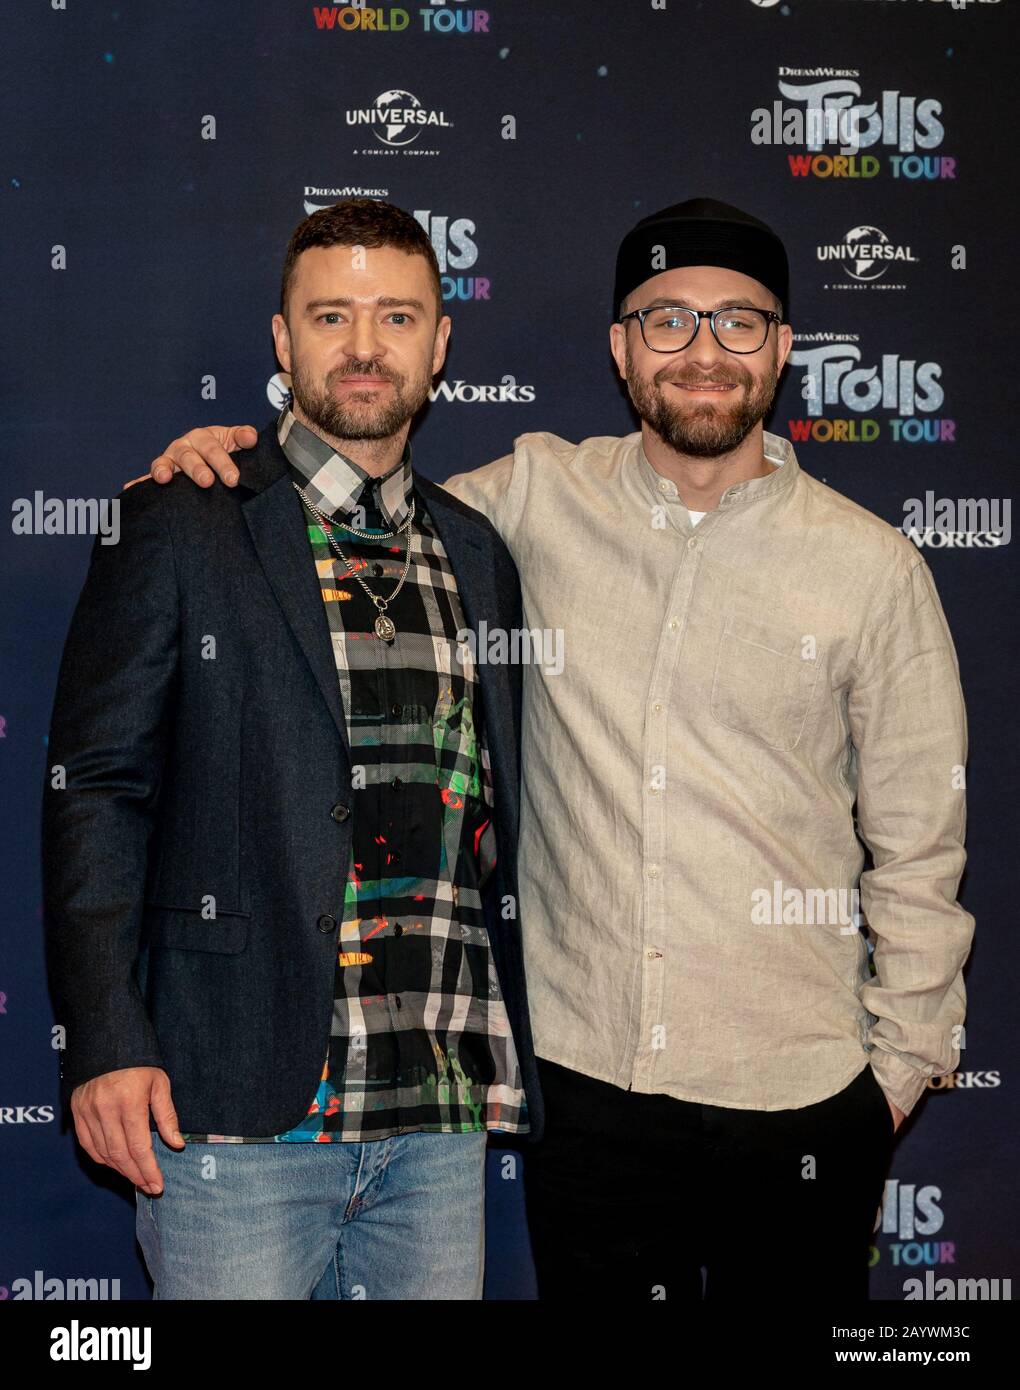 Berlin, Germany. 17th Feb, 2020. 17.02.2020, Justin Timberlake and Mark Forster at the photocall for the film Trolls World Tour at the Waldorf Astoria Hotel in Berlin. The new animated film from DreamWorks Animation, distributed by Universal Pictures International Germany, will be launched nationwide on April 23, 2020 in German cinemas. | usage worldwide Credit: dpa picture alliance/Alamy Live News Stock Photo